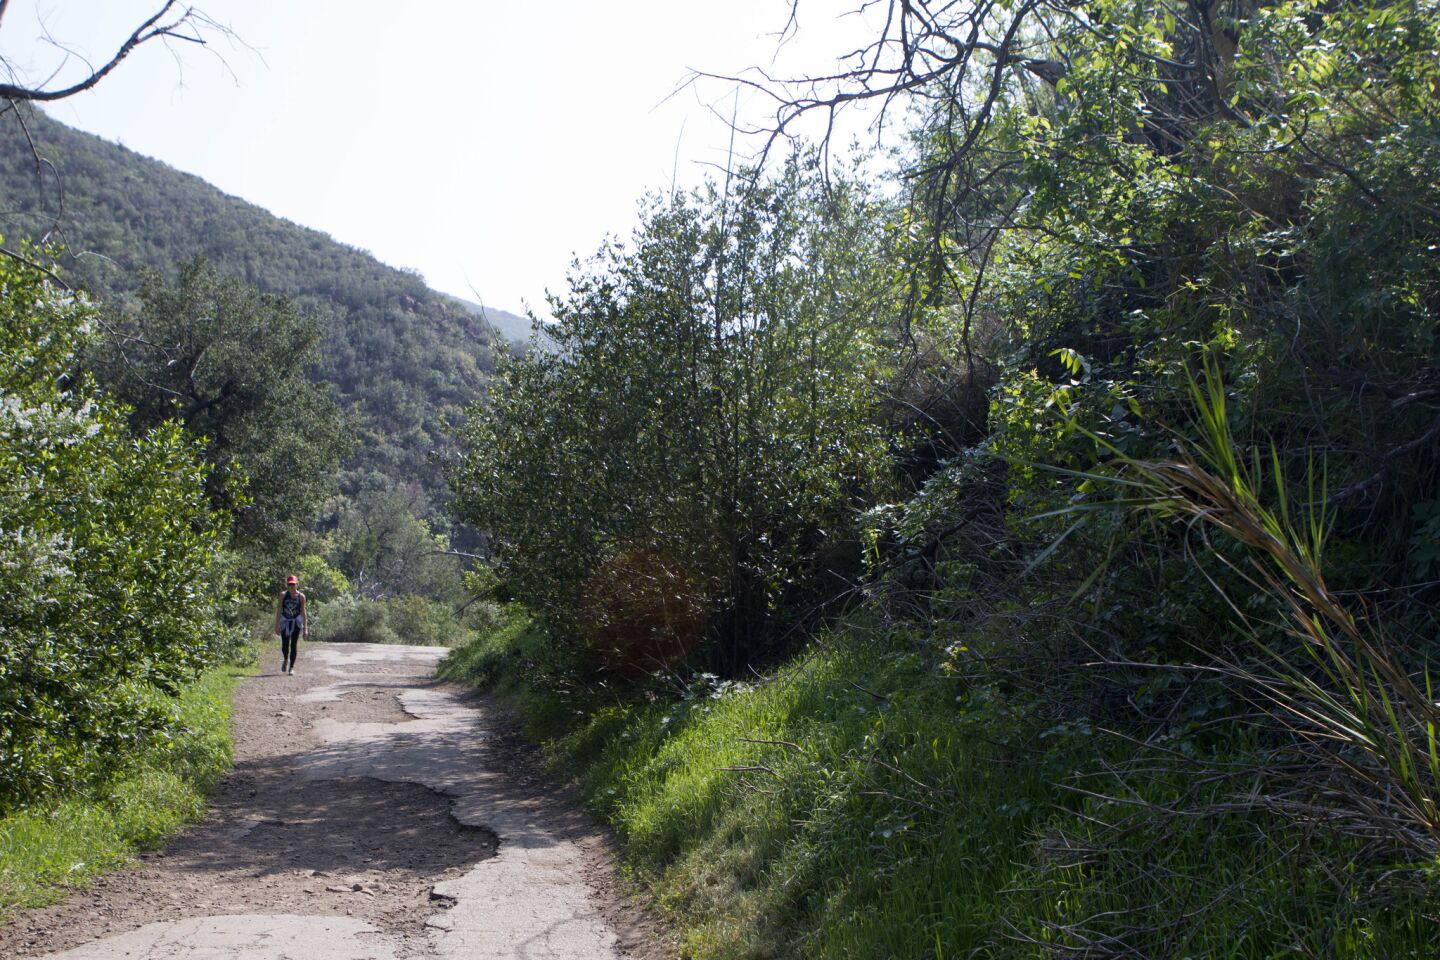 Return on the Tropical Terrace Trail, with its wide path that's occasionally paved, through the sycamore and oak-lined canyon.